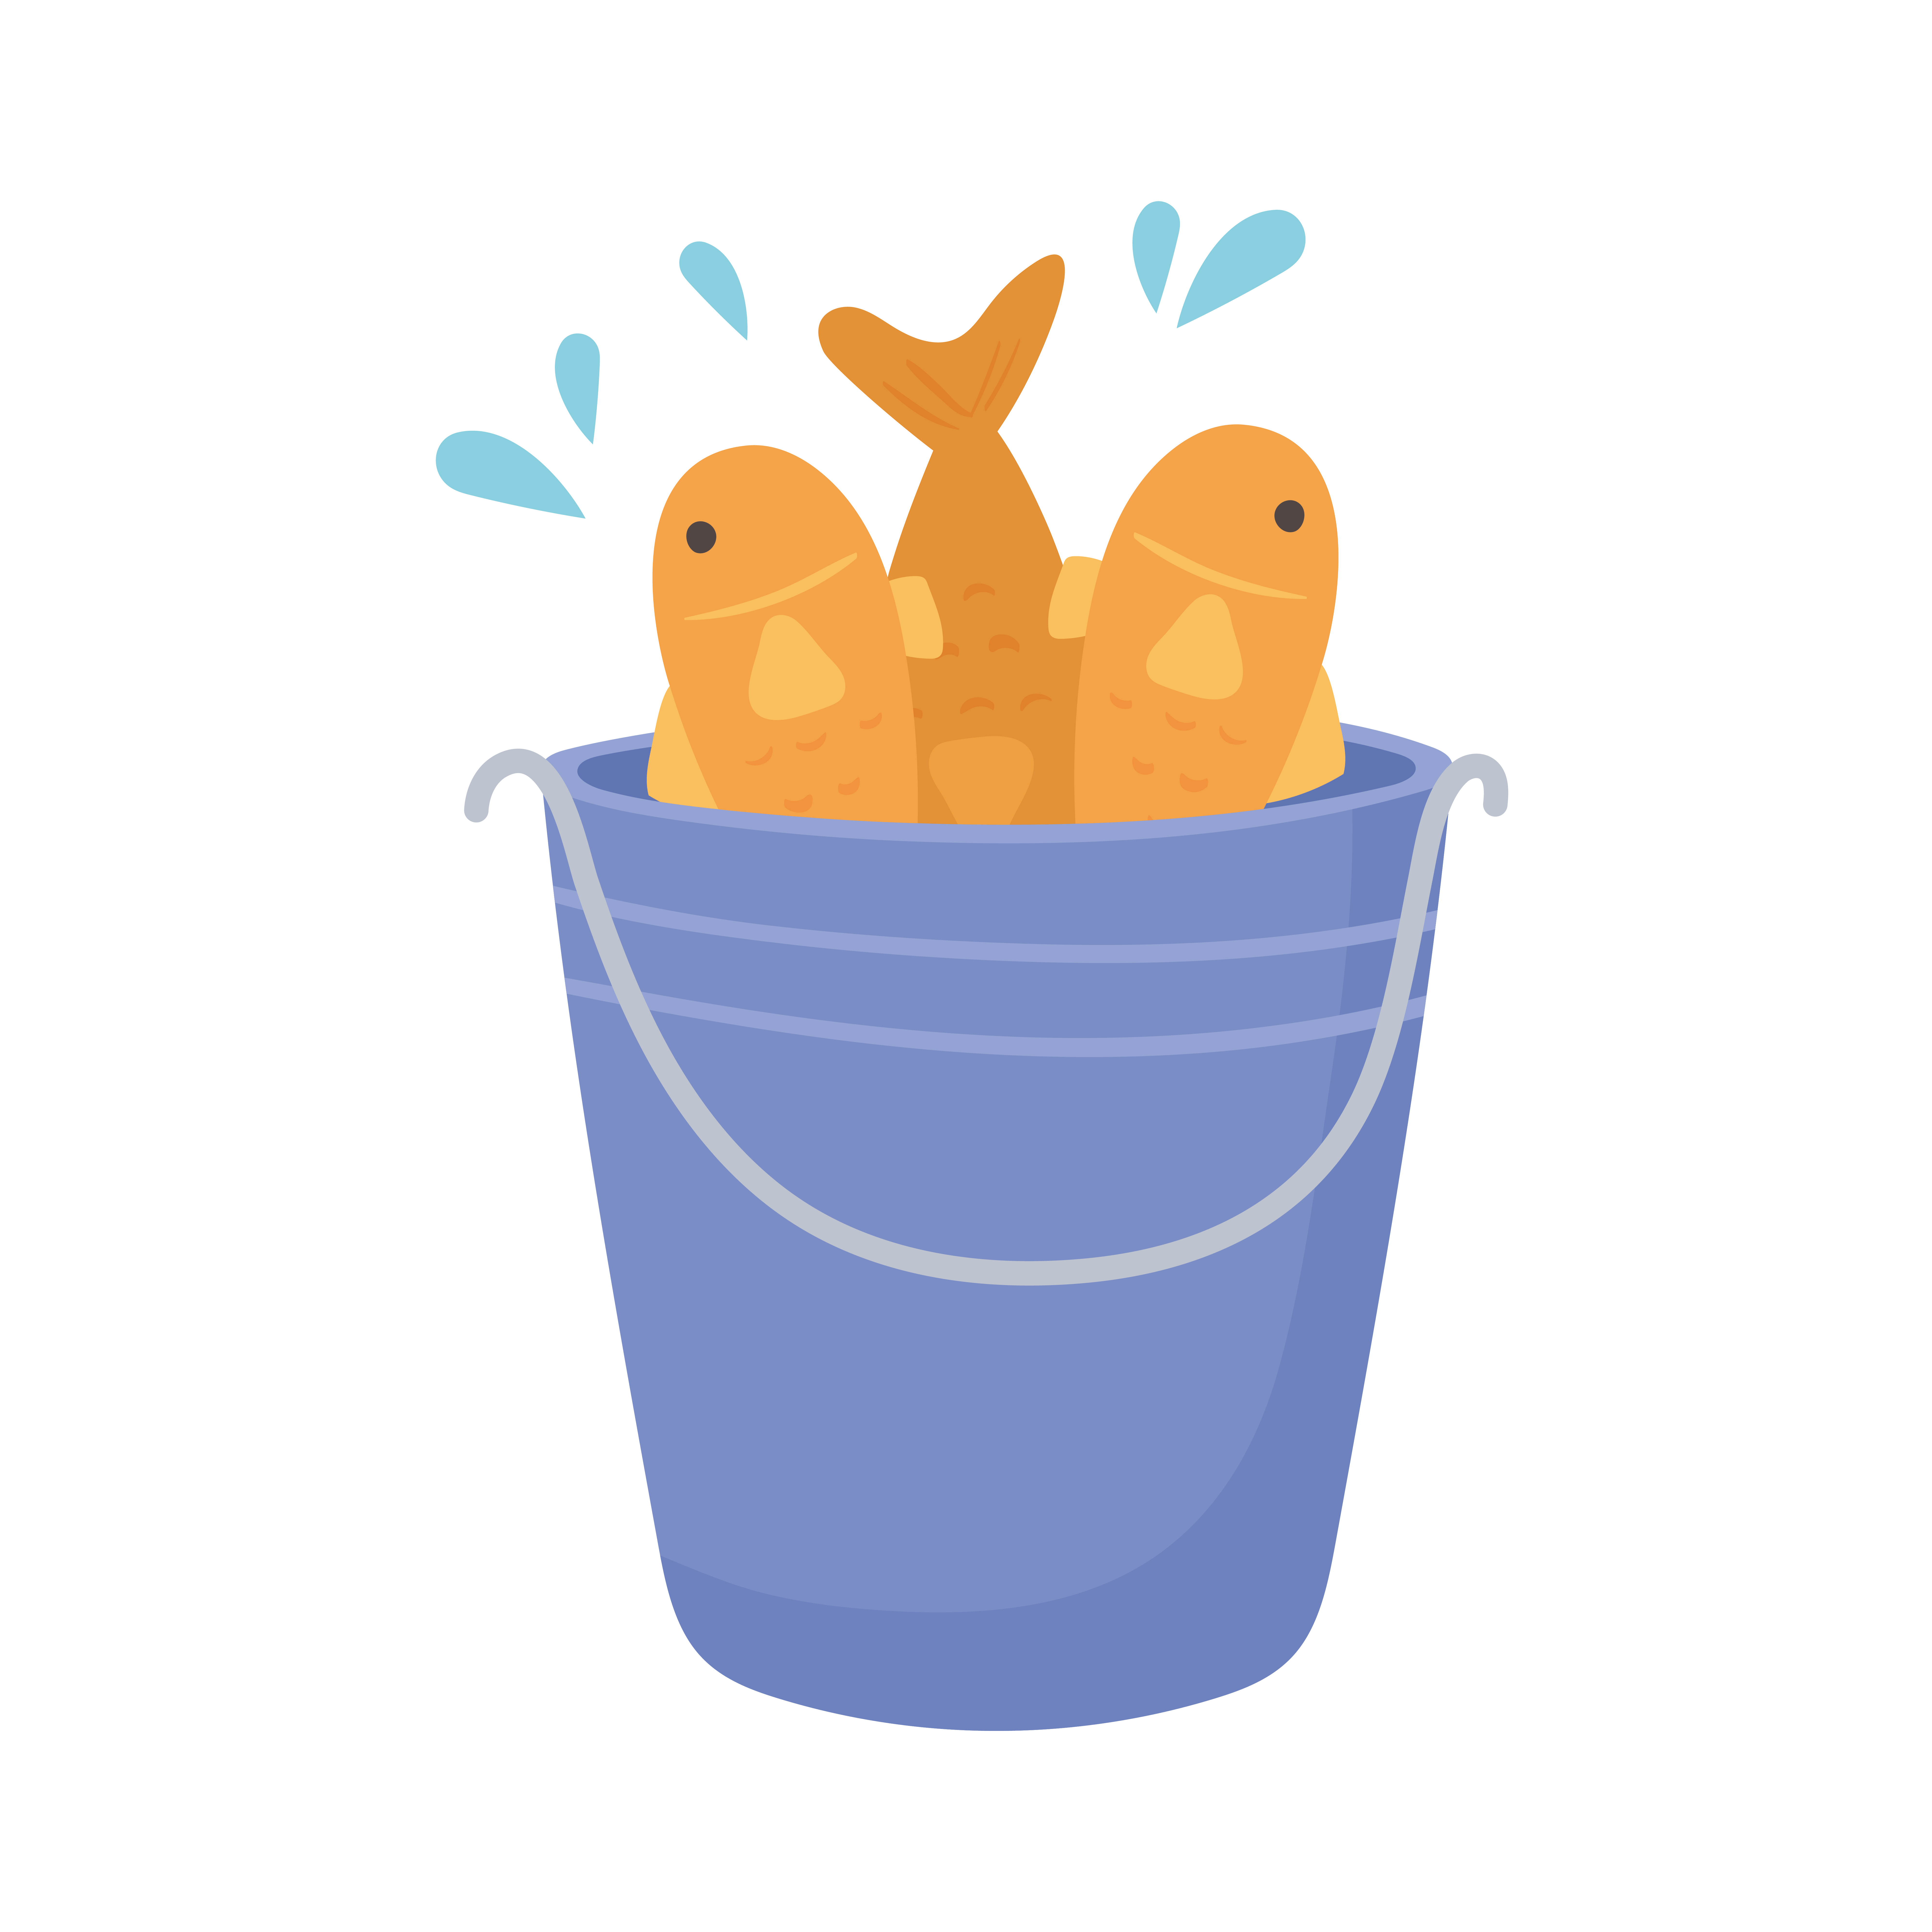 https://static.vecteezy.com/system/resources/previews/002/453/215/original/fishes-on-bucket-free-vector.jpg